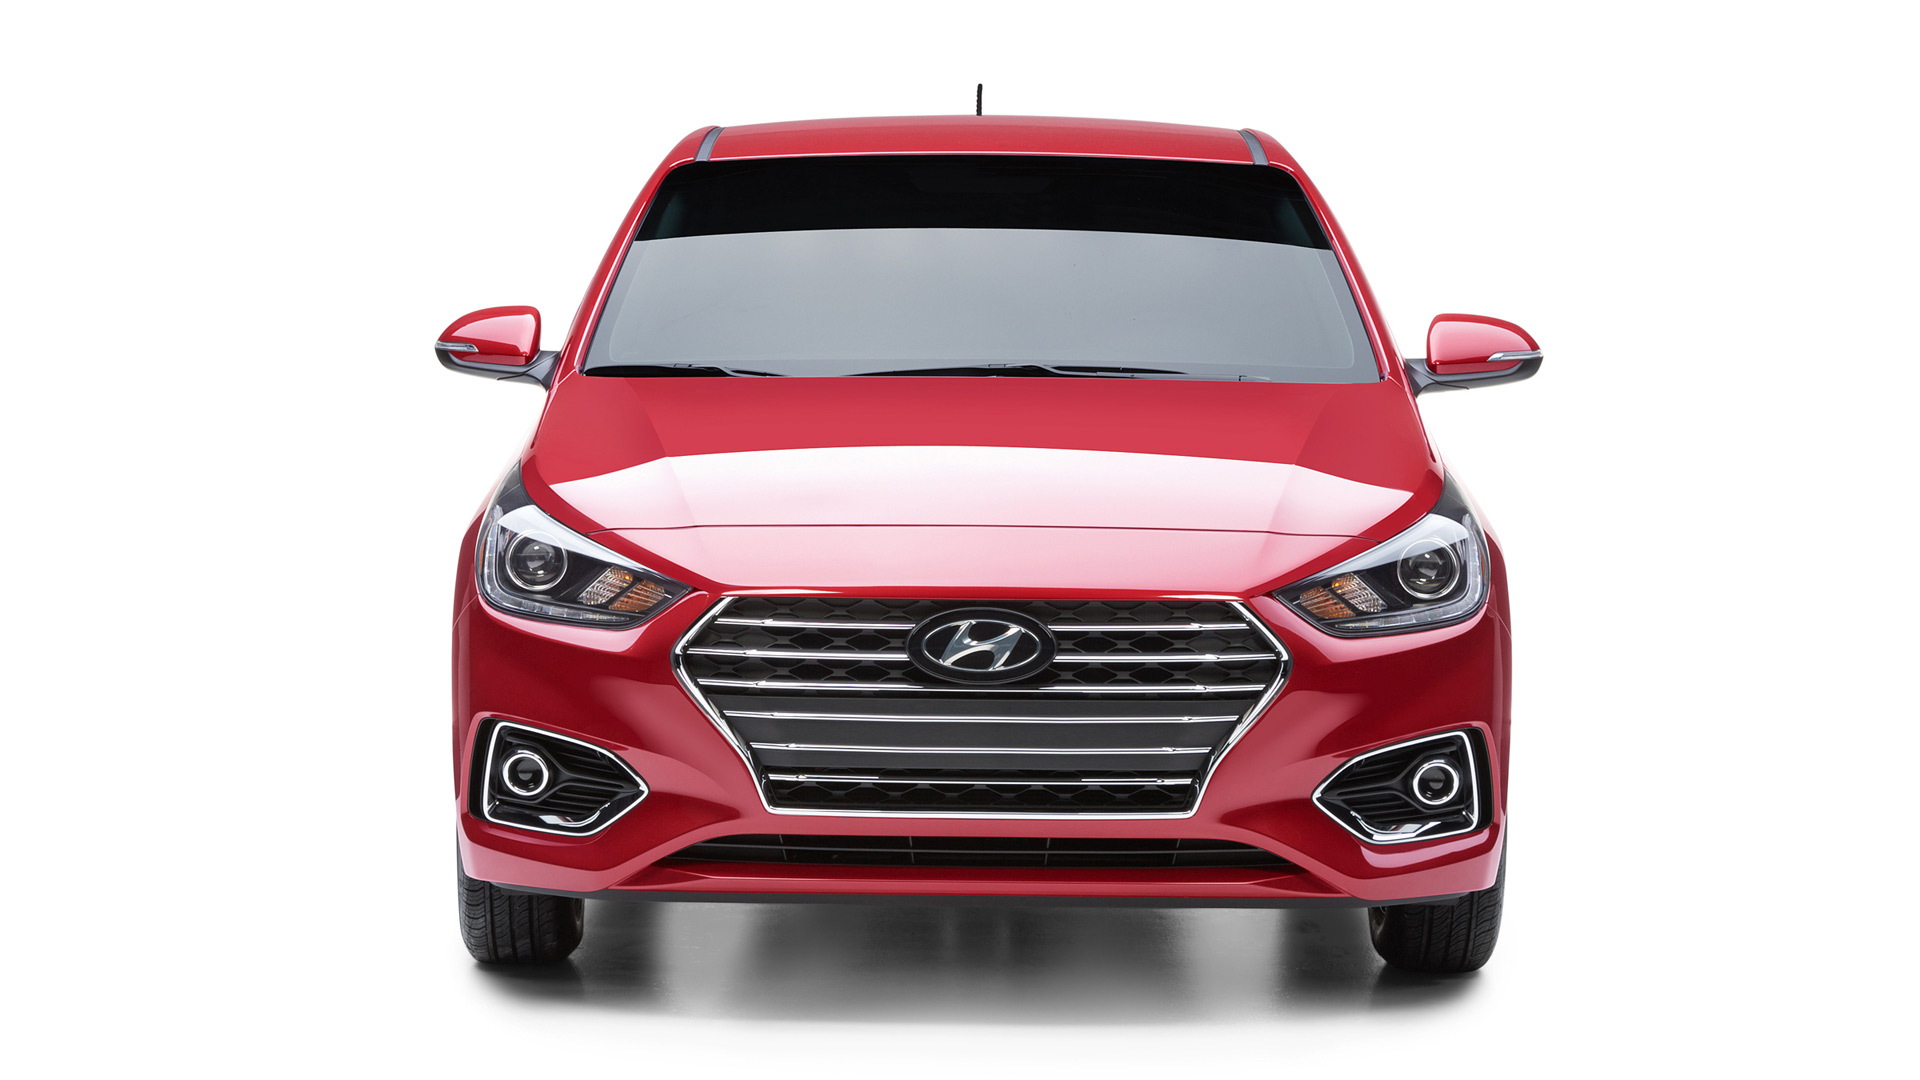 2018 Hyundai Accent confirmed for U.S. as well as Canada (update)